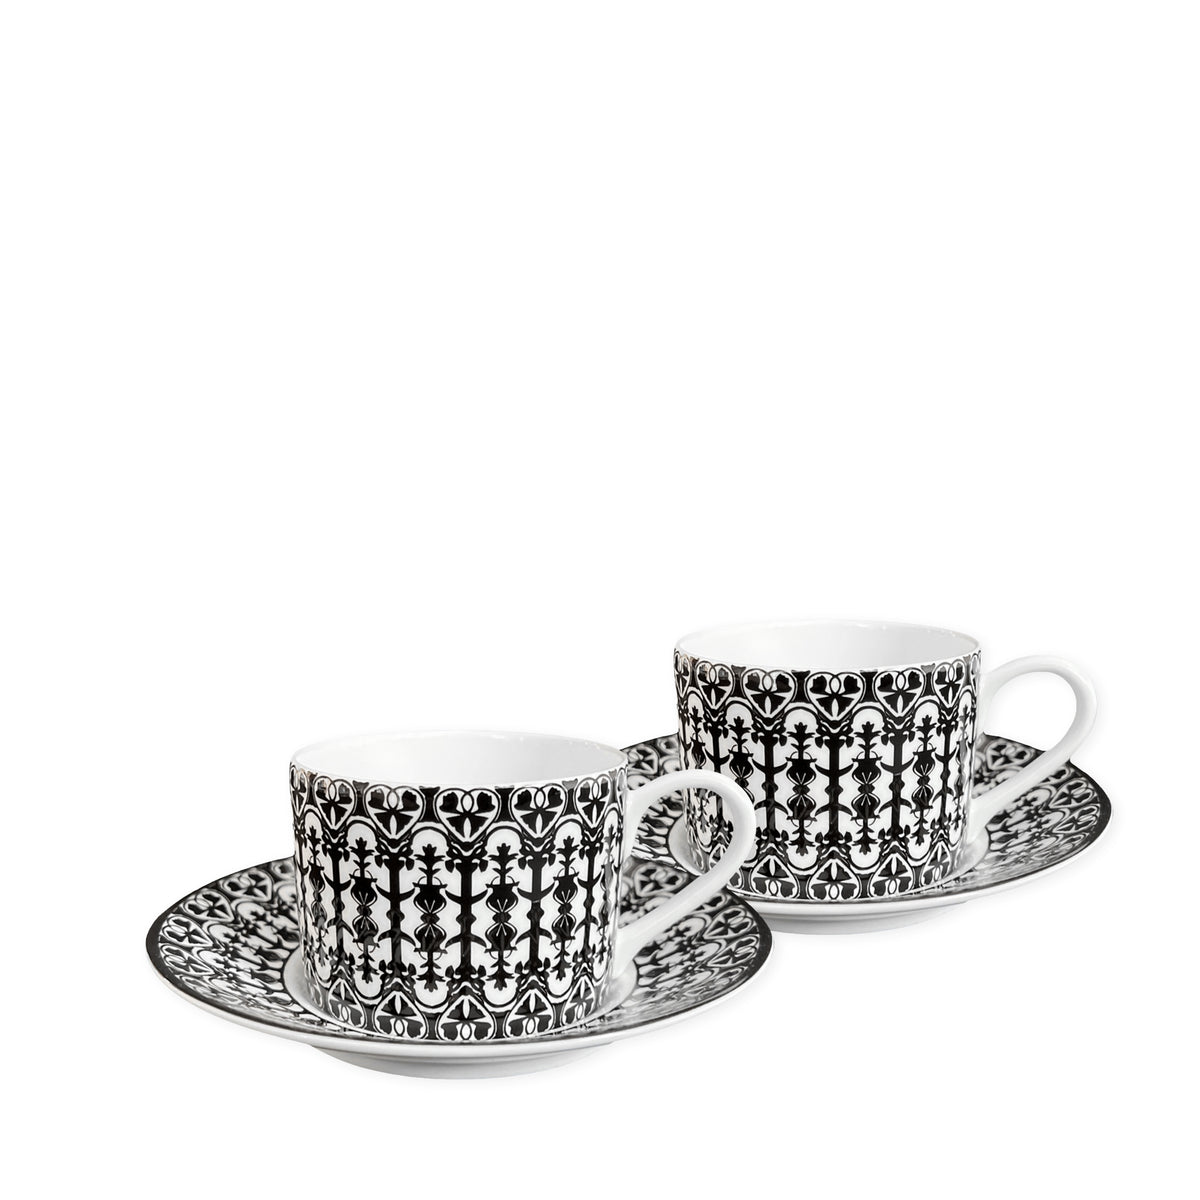 Casablanca black and white bone china teacup and saucer set of 2 from Caskata